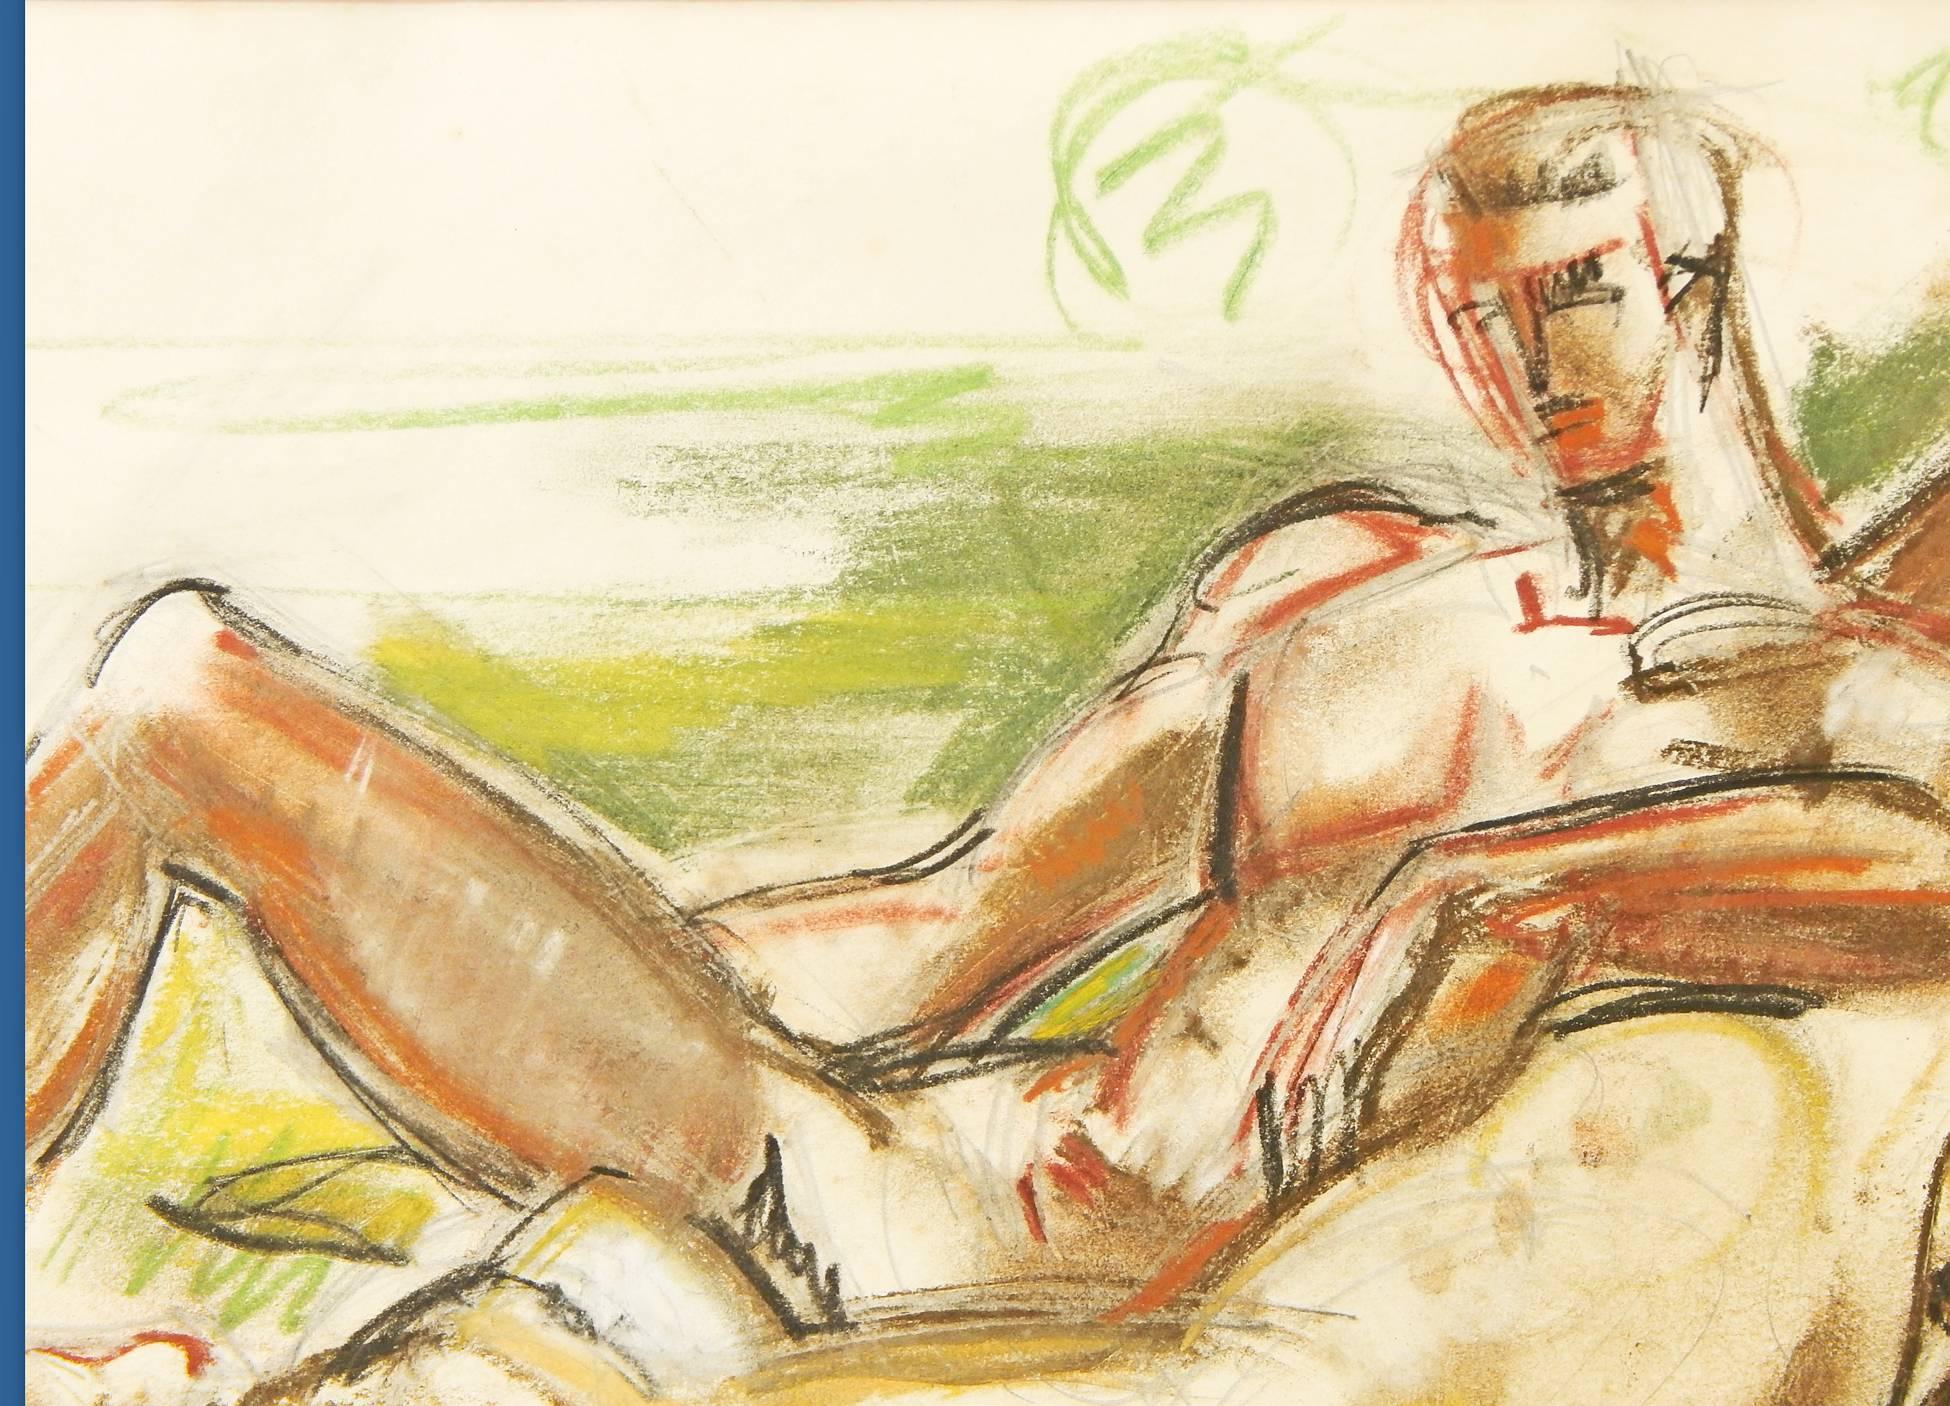 This drawing is a highly important and rare window into a relationship that impacted the larger world of Abstract Expressionism in New York just a few years after it was made in 1949. The artist is William Littlefield, who depicts his model, Fred